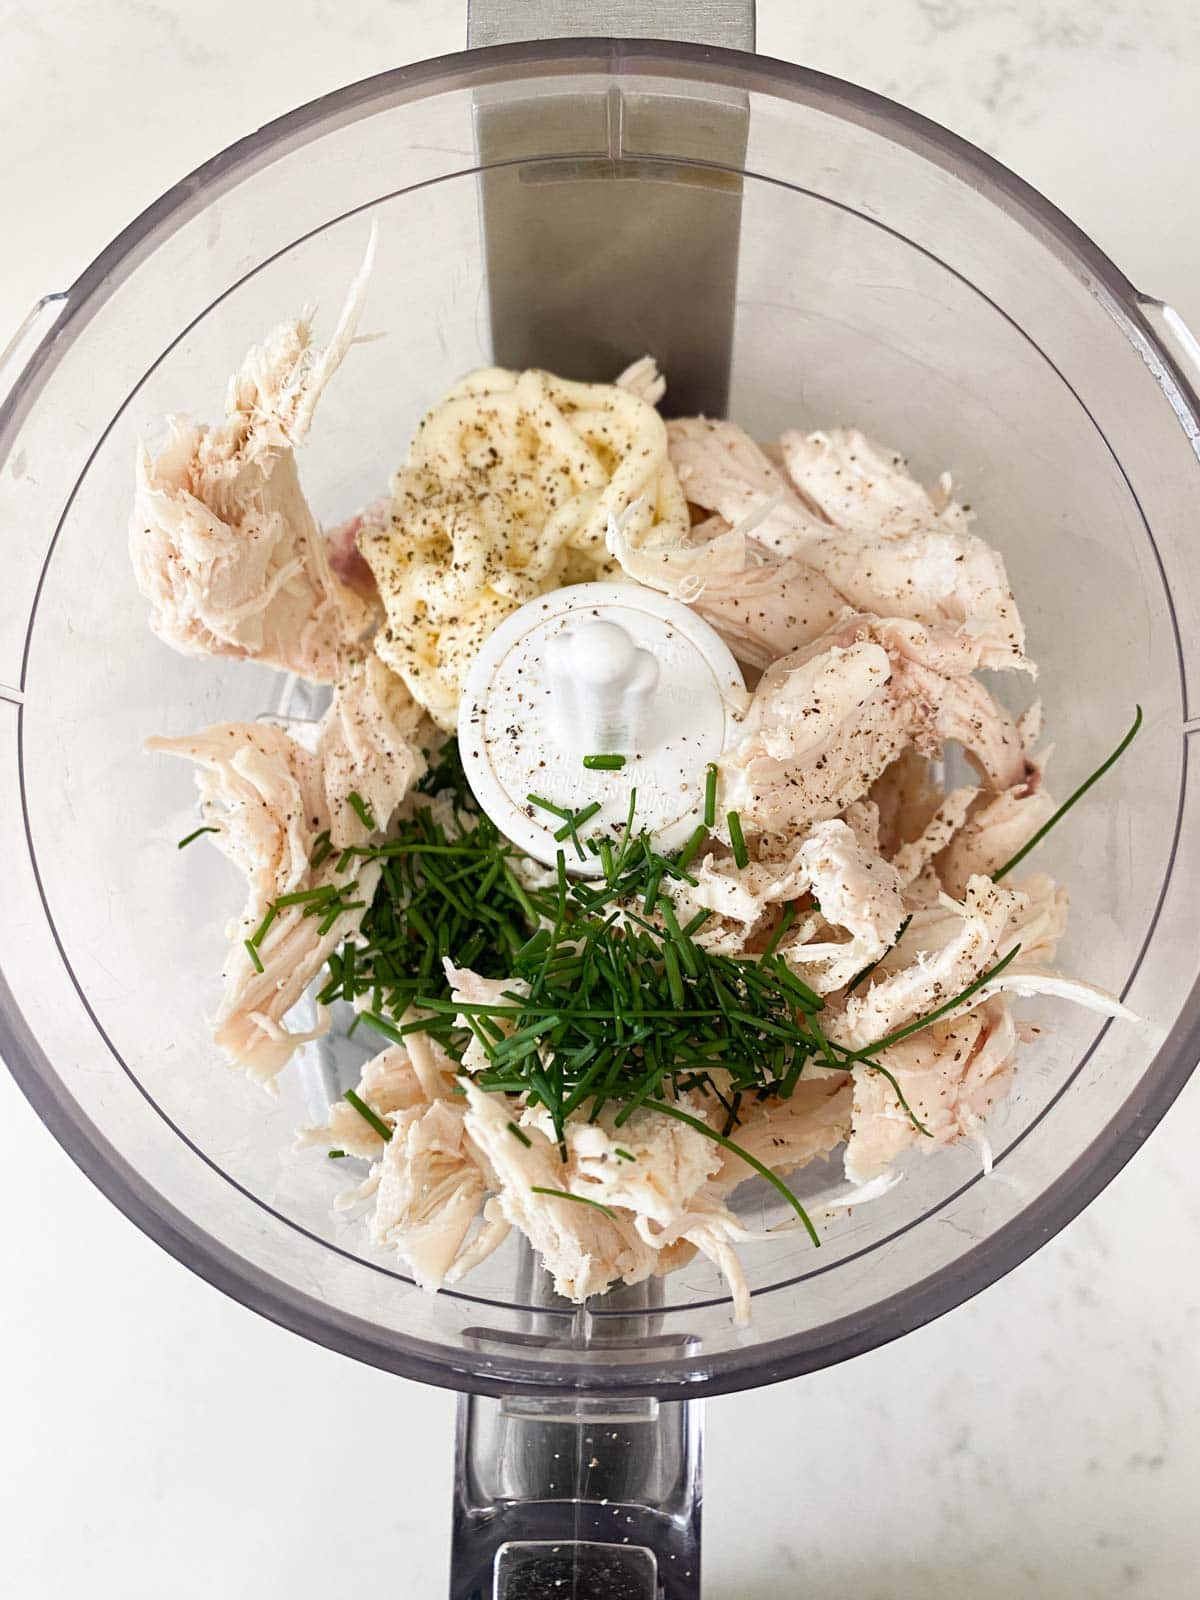 Chicken, chives, and mayo in a food processor